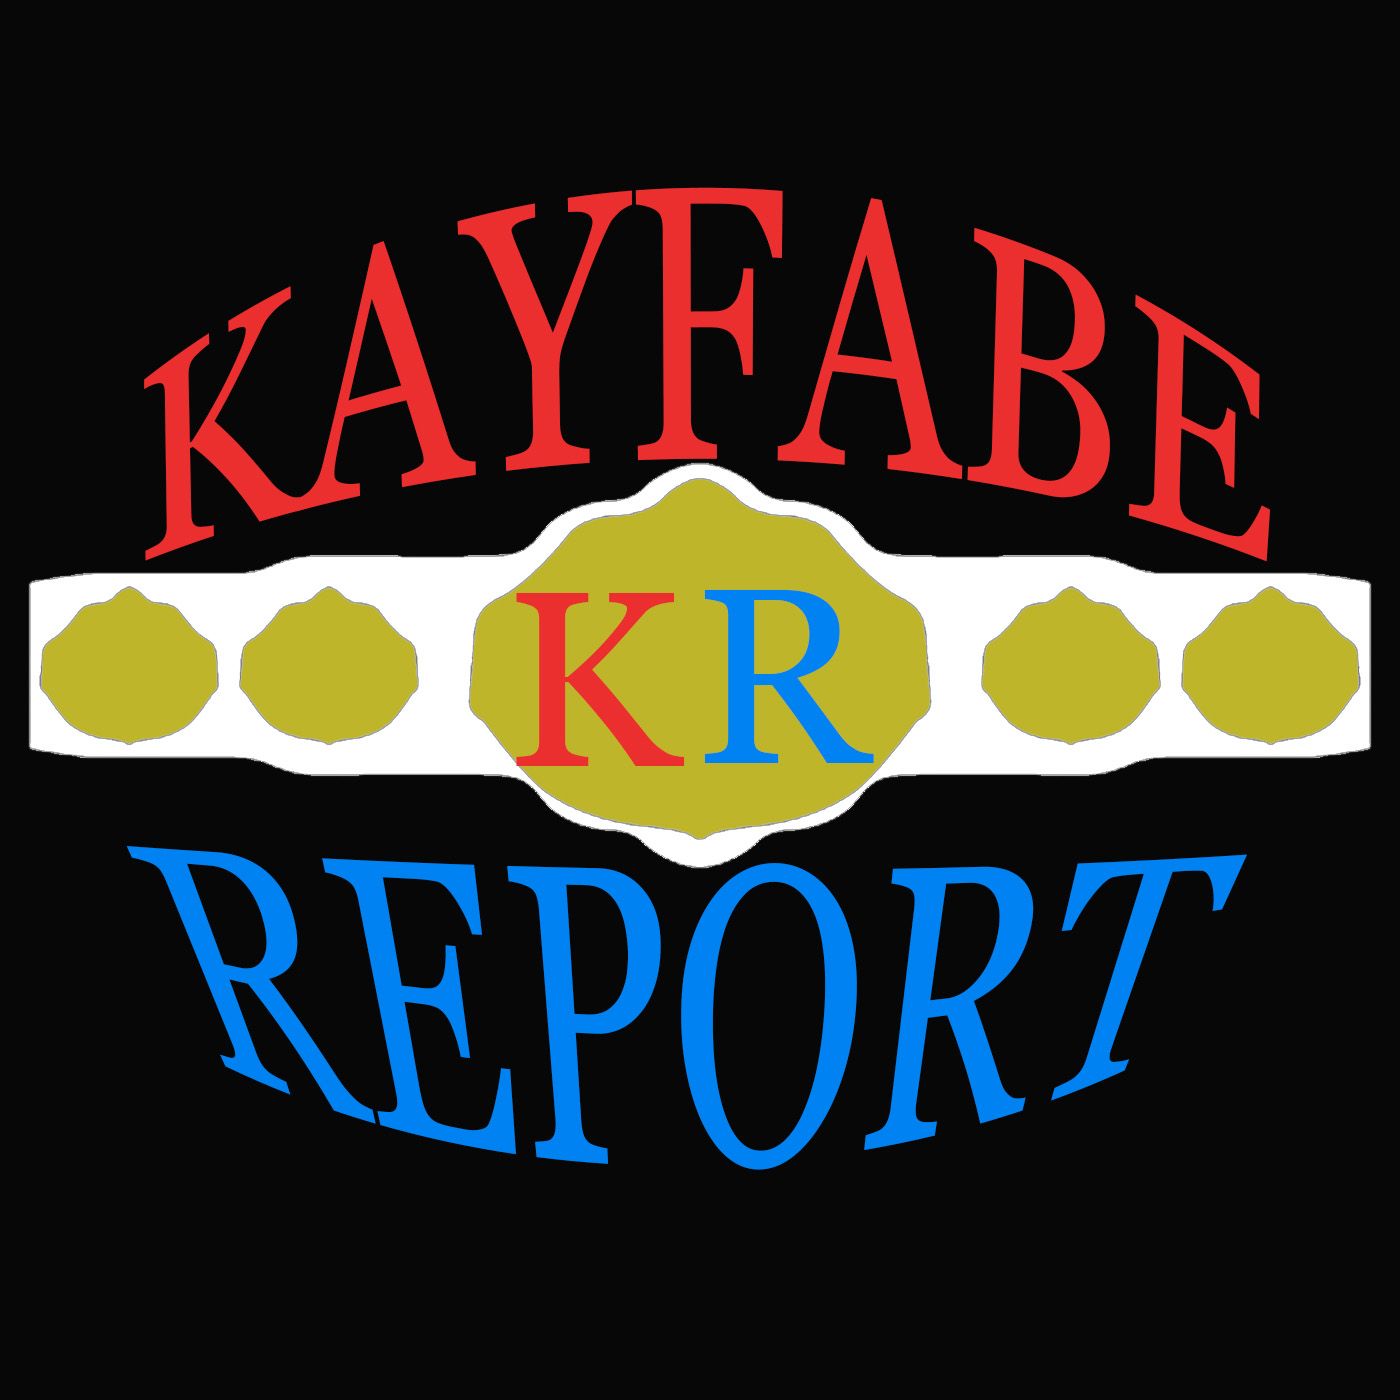 kayfabe report #45 - Who’s you’re Cena faction?